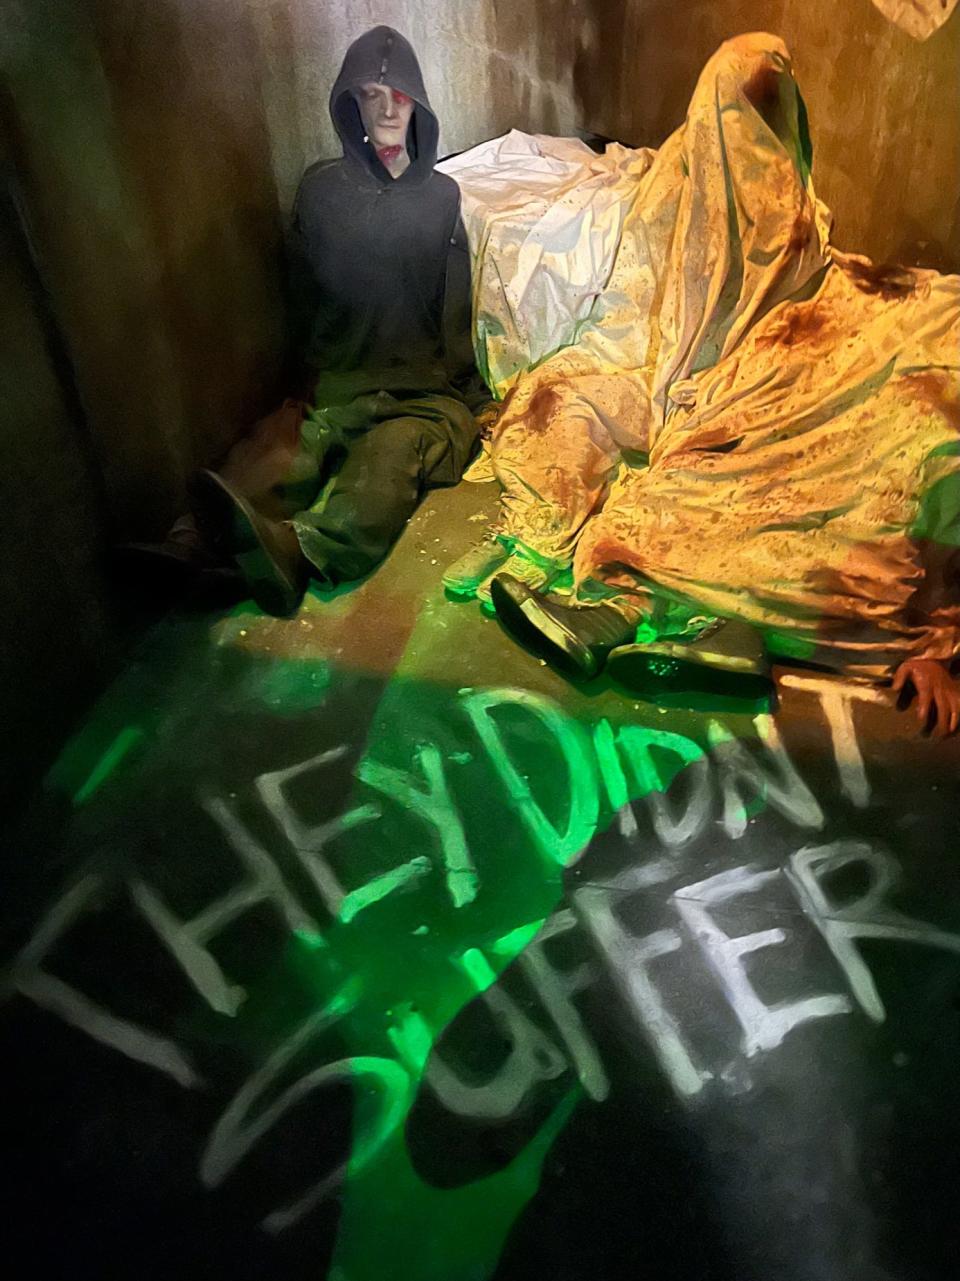 This scene in Universal Orlando's The Last of Us haunted house is directly inspired by the video game.